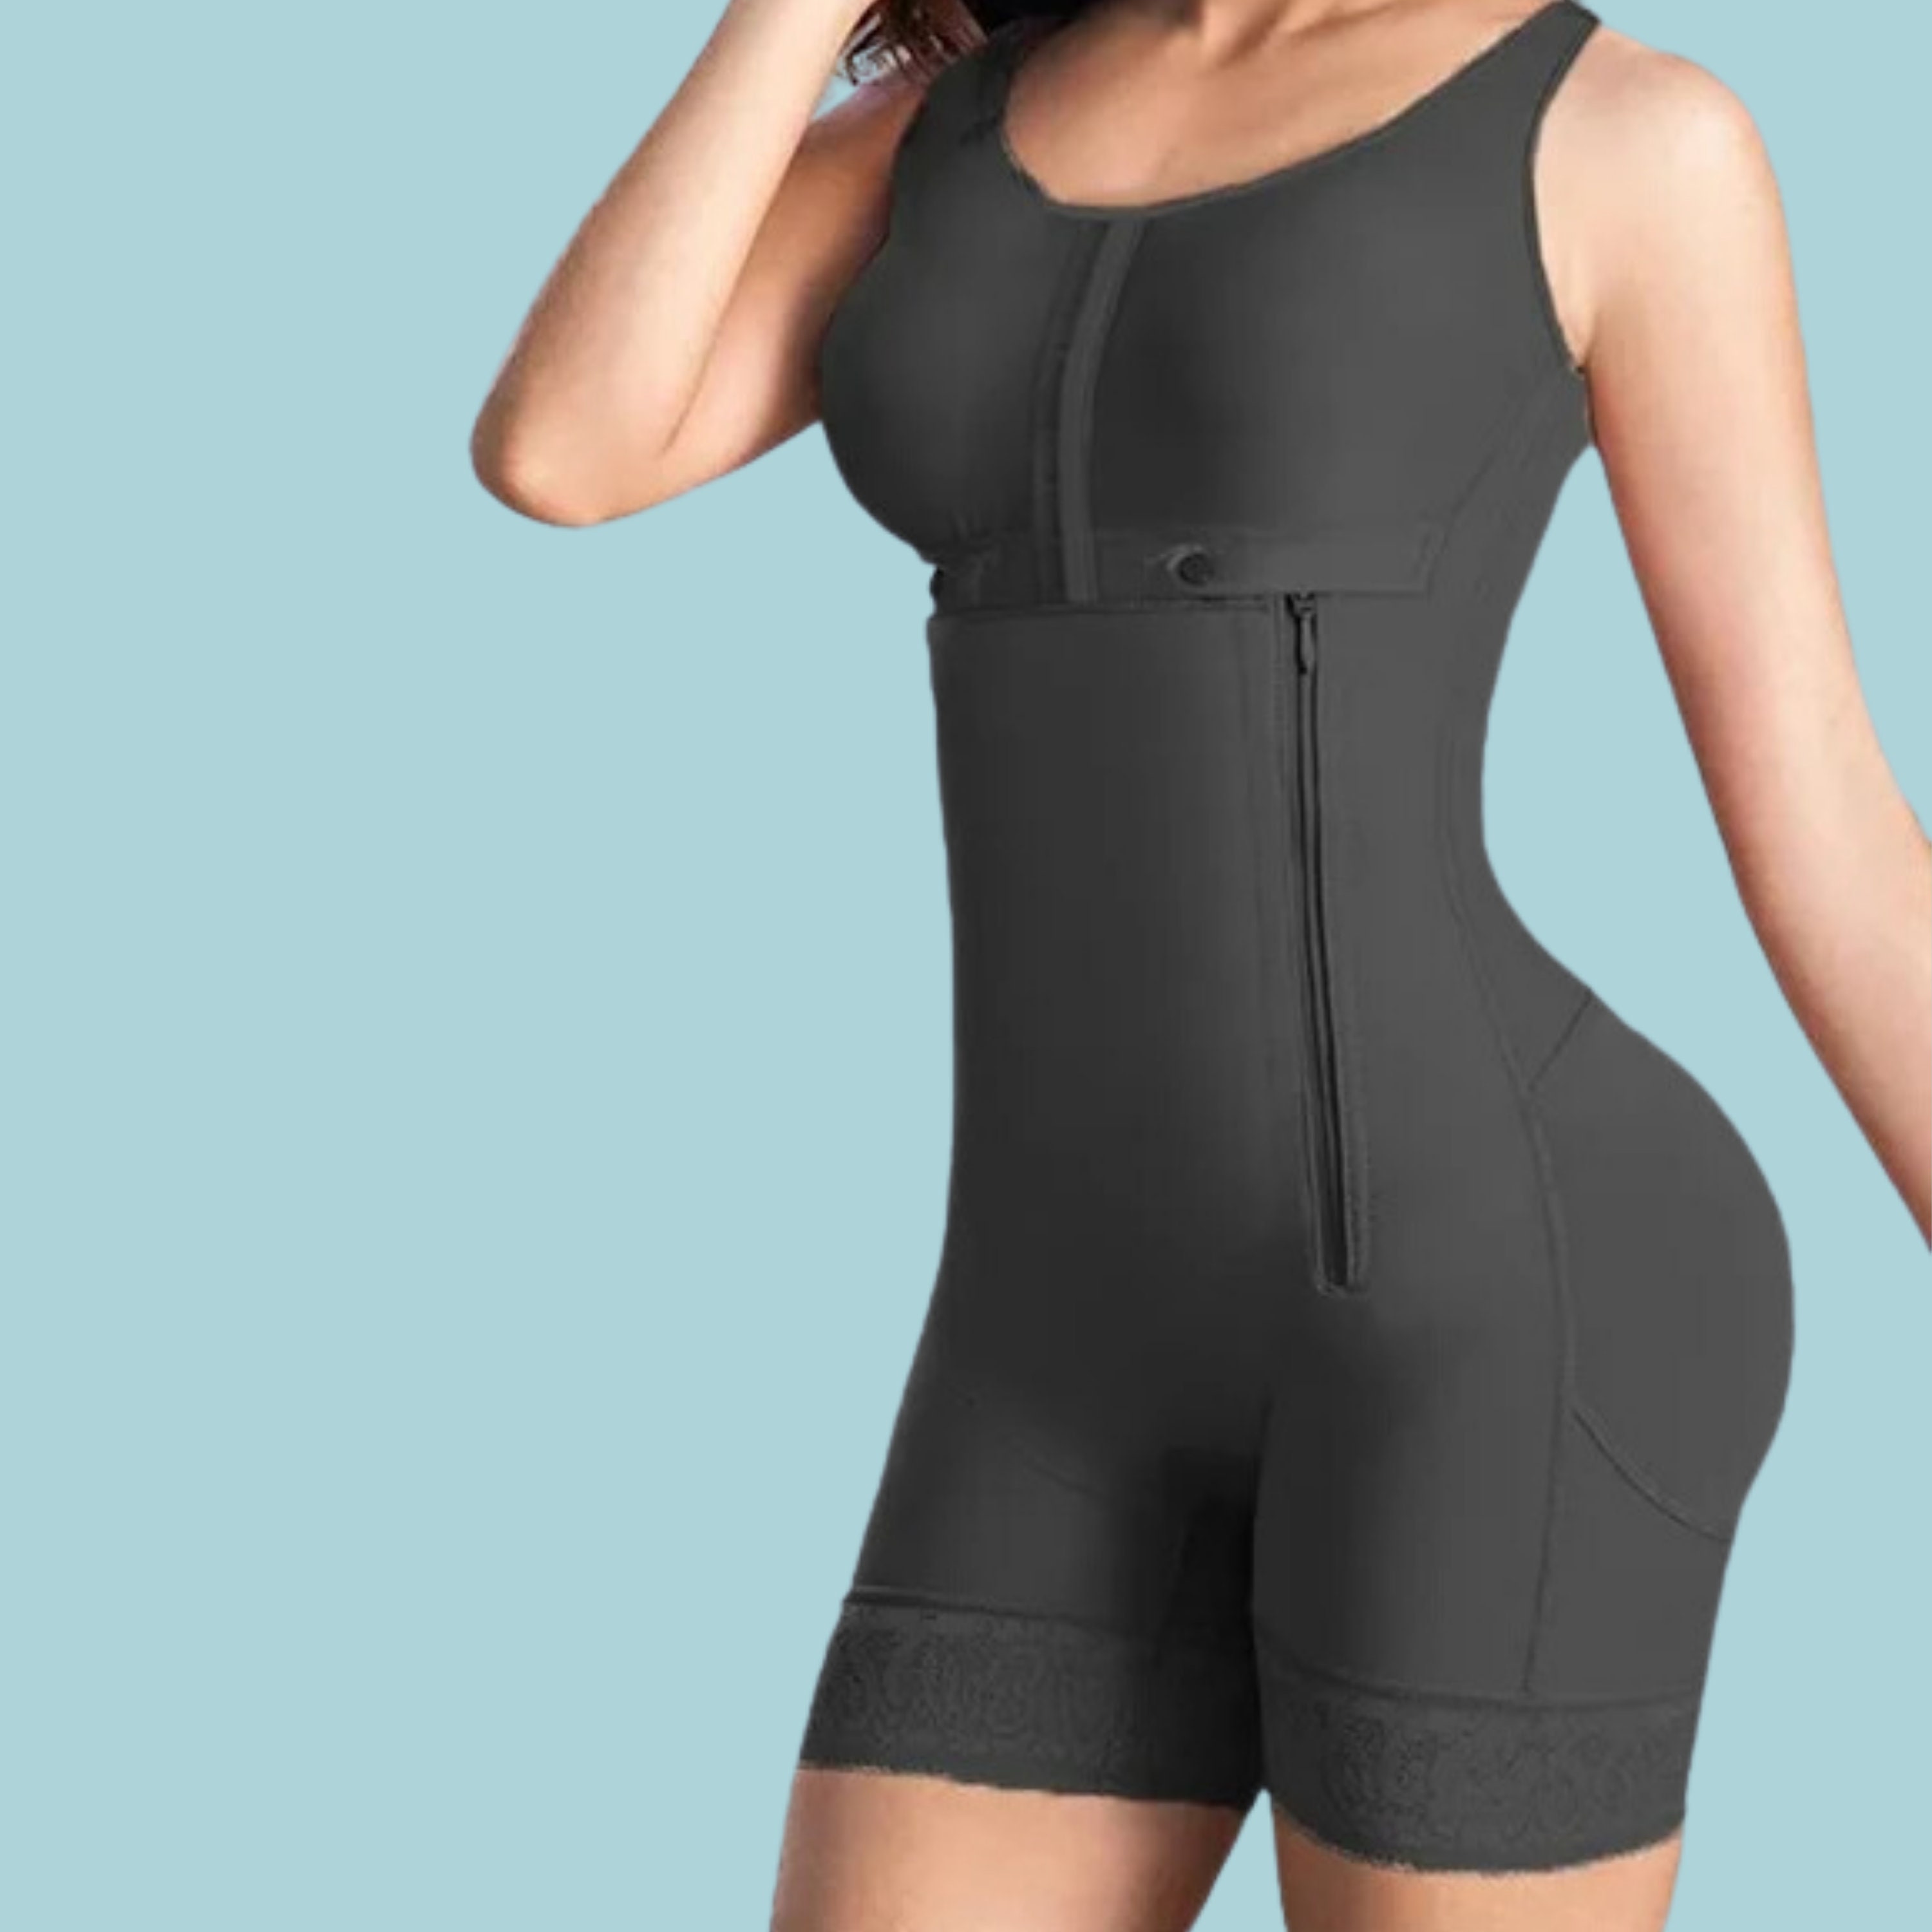 Buy Butt Lift Shapewear Online In India -  India